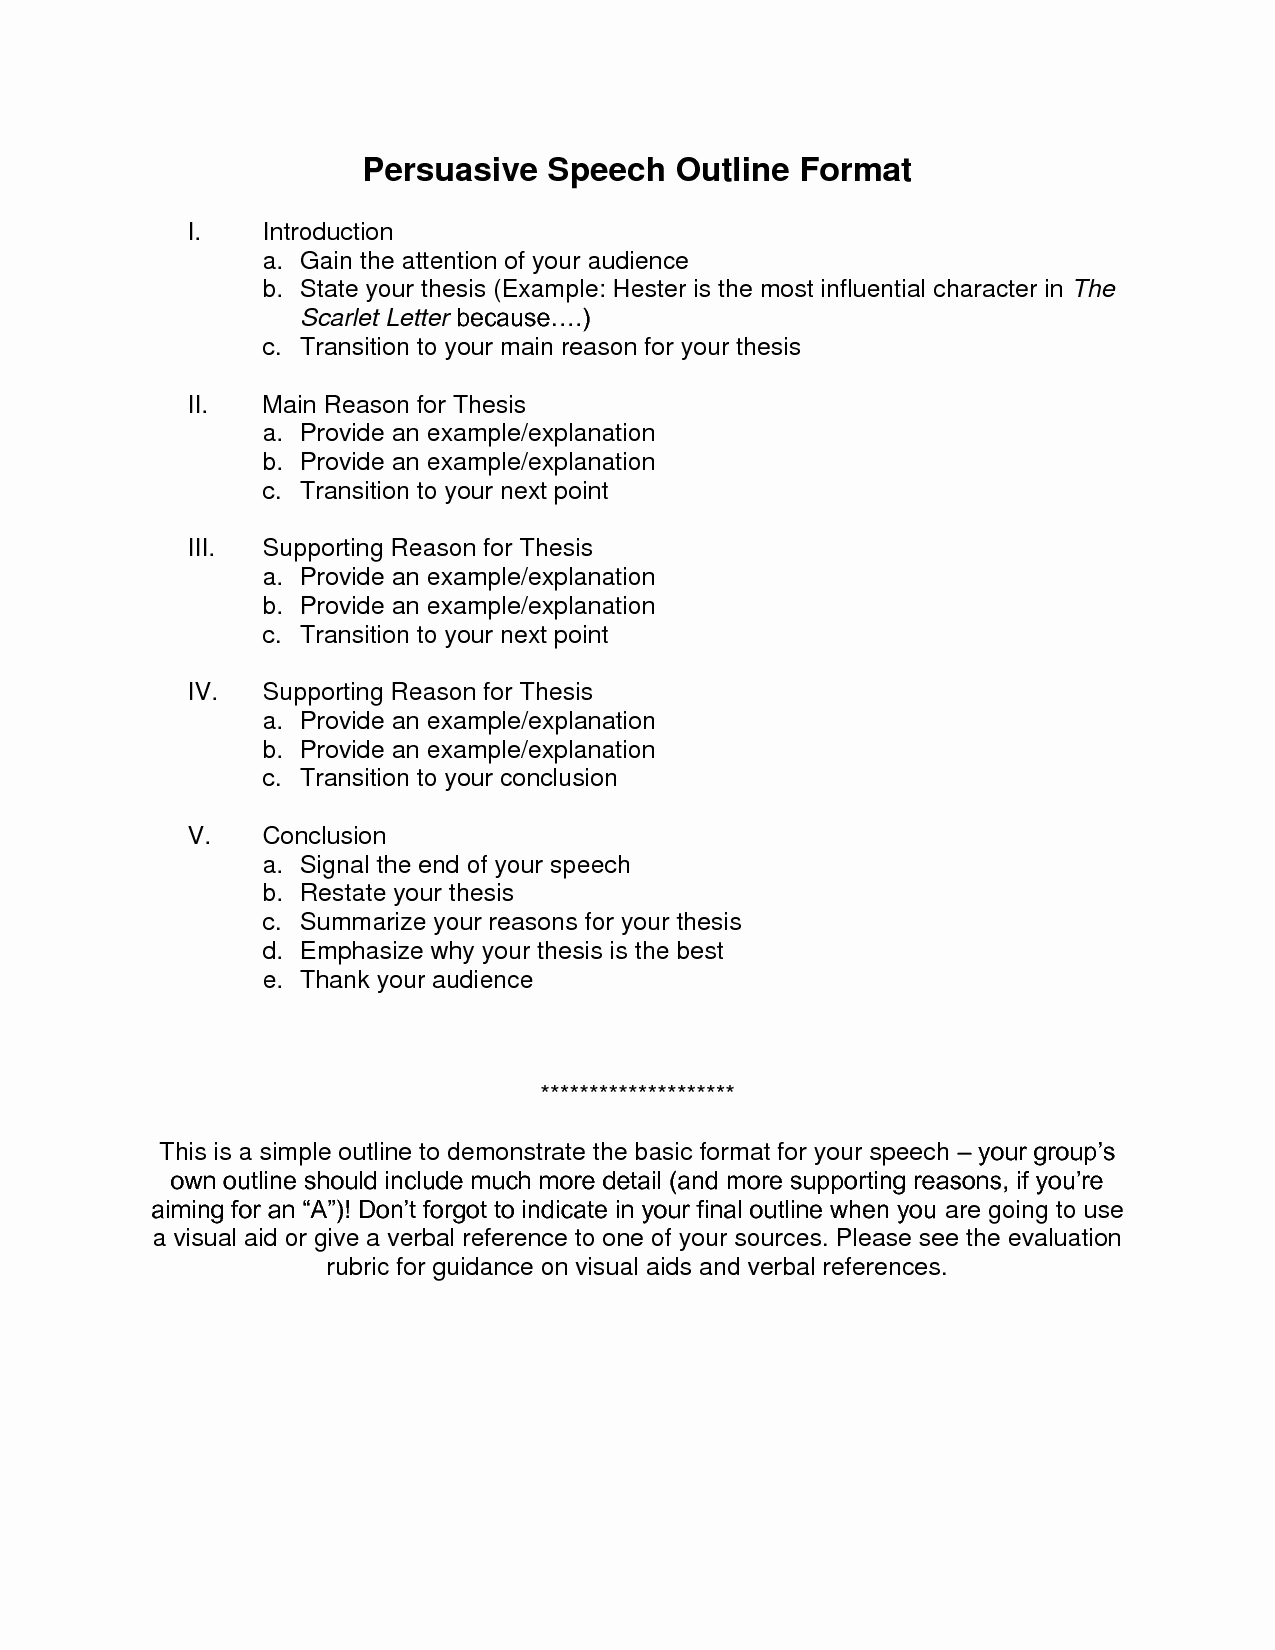 Distracted Driving Essay Outline Lovely Persuasive Speech Outline format Pxodcnt9